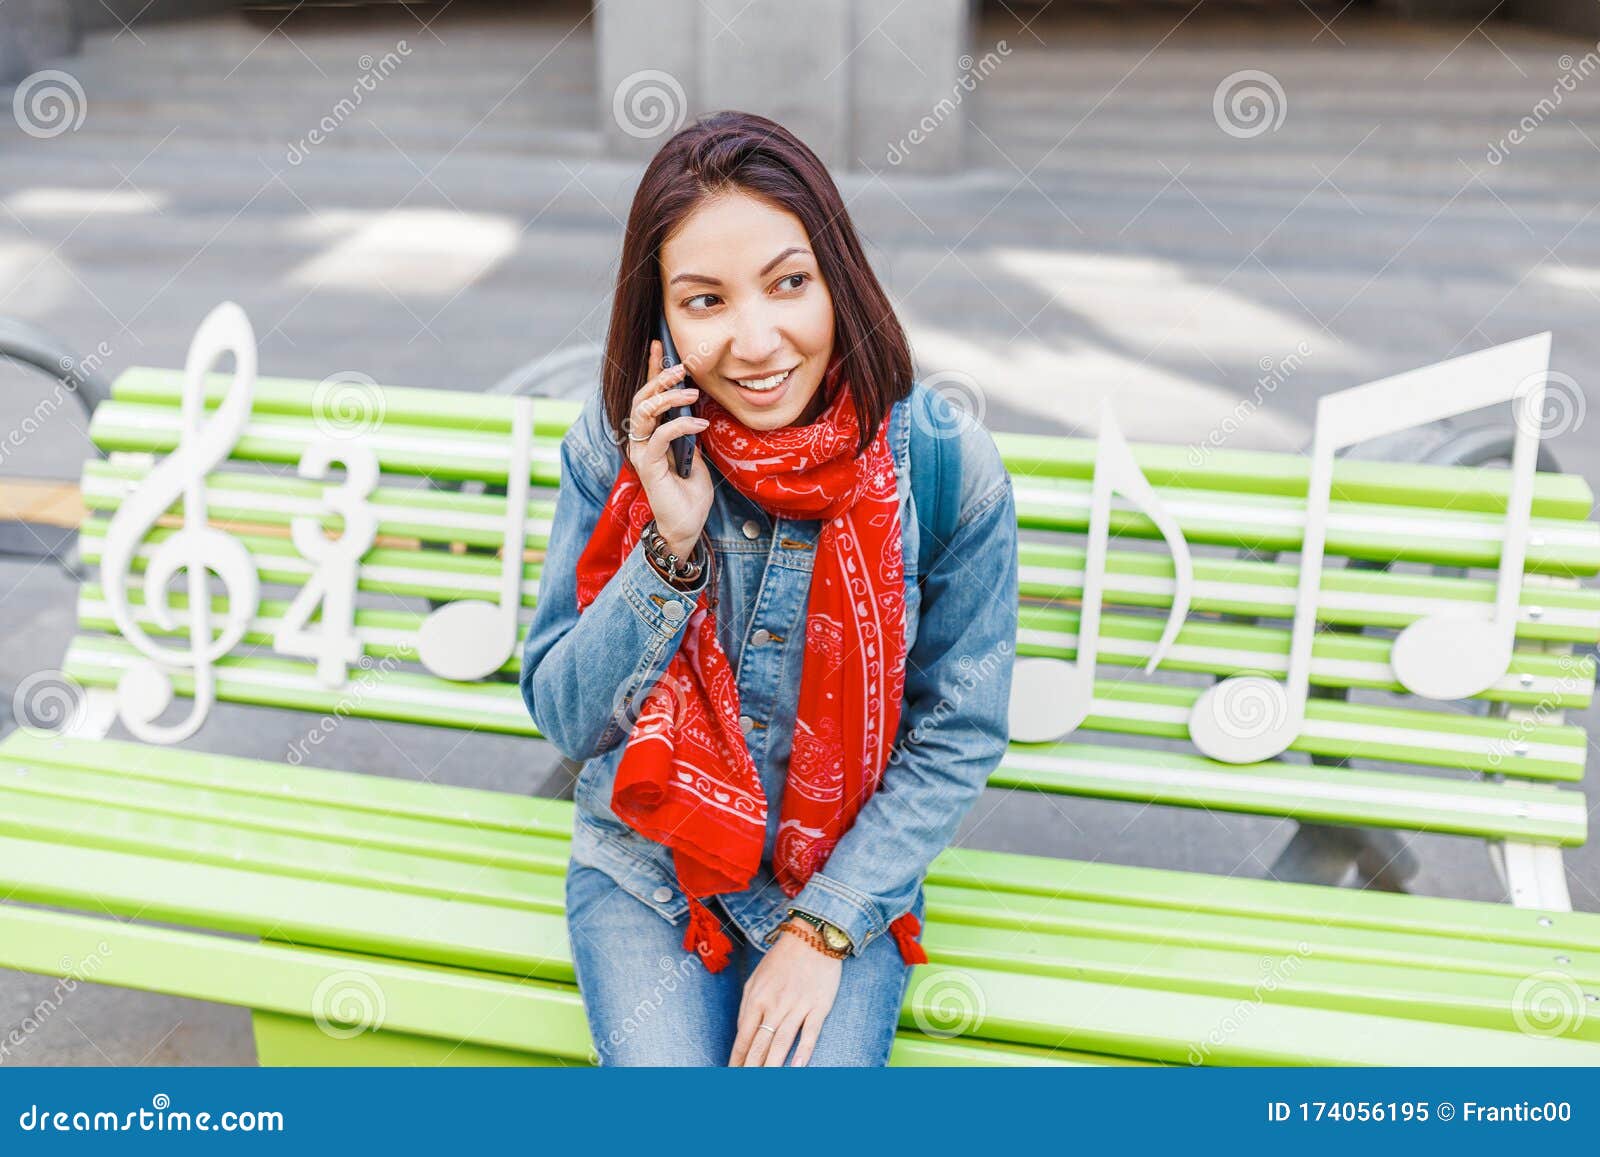 Free Photo | Vertical shot of a girl sitting on the bench 